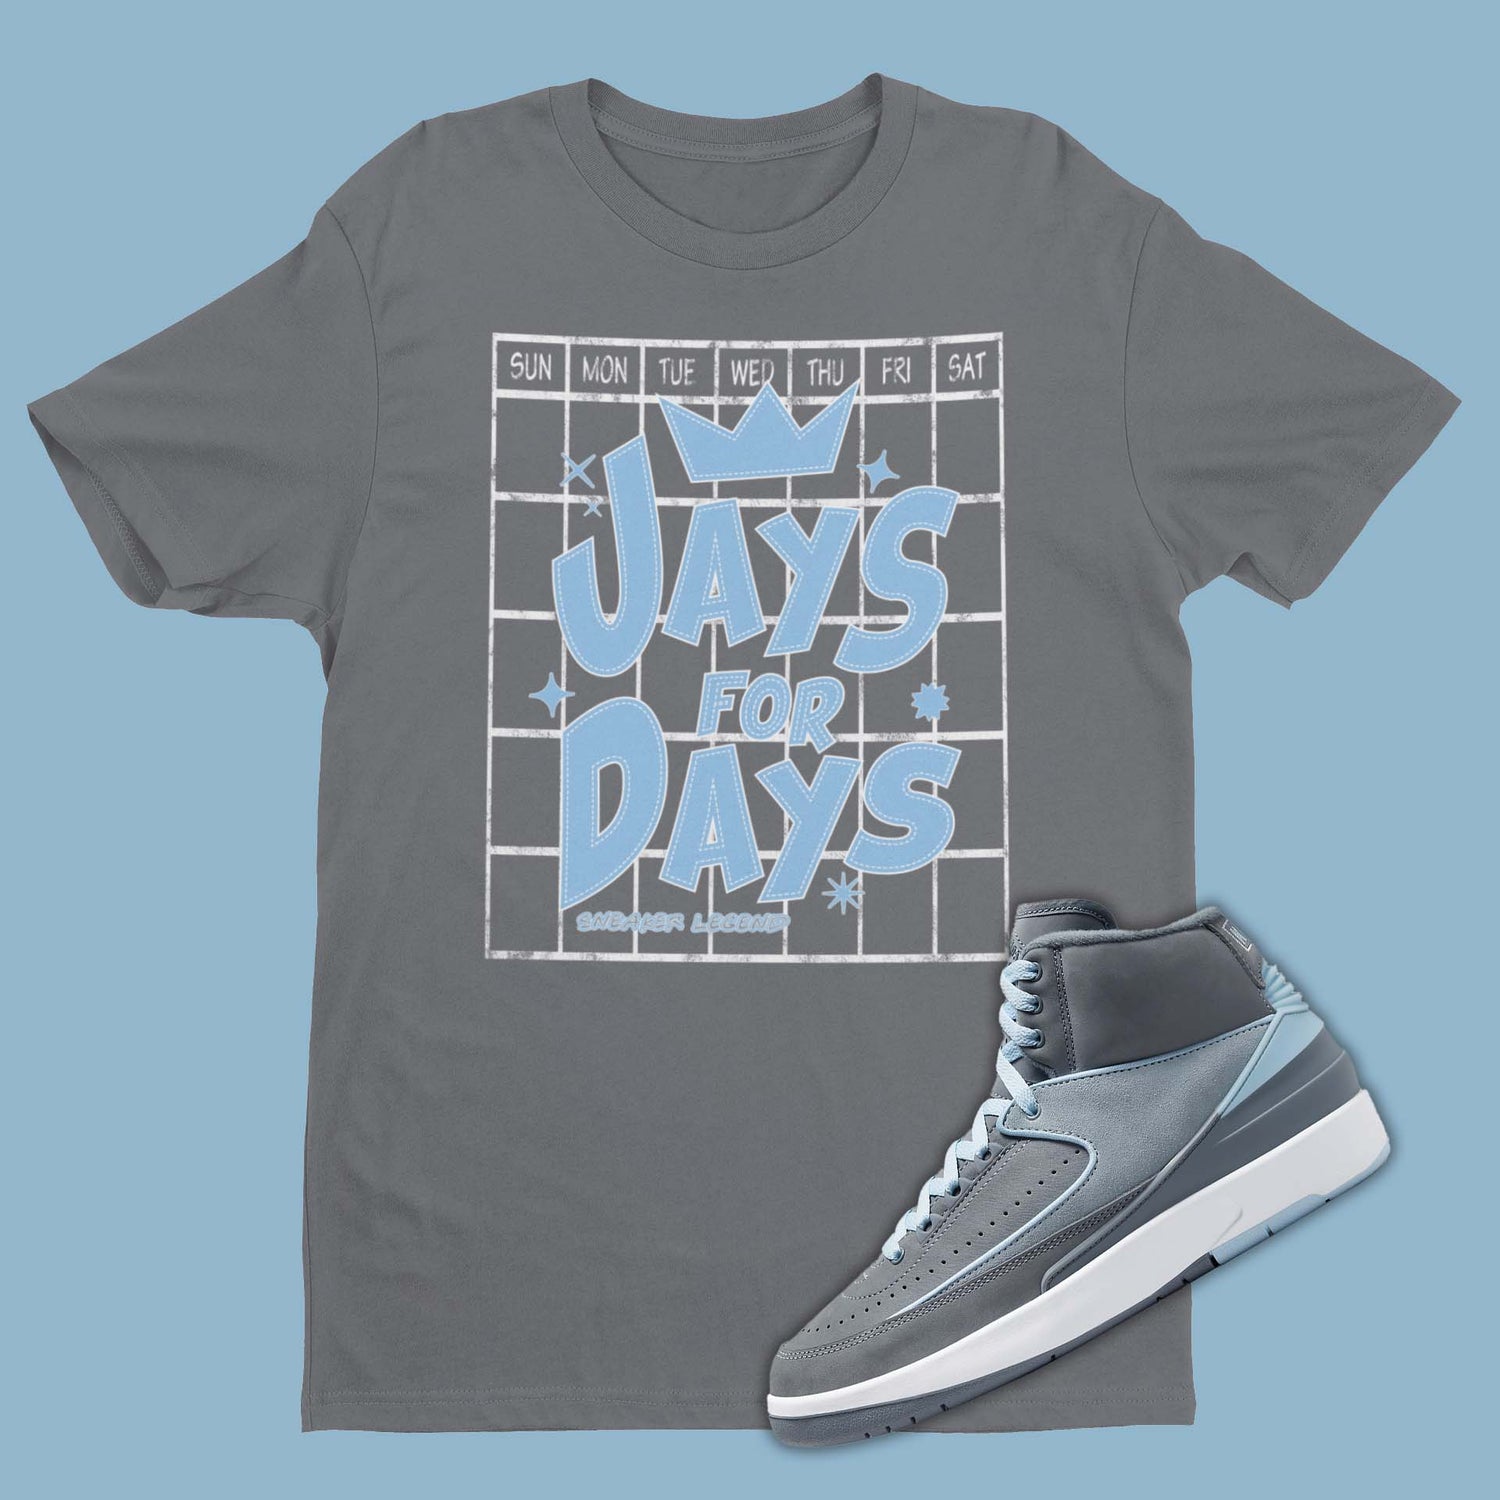 Grey t-shirt featuring a graphic of Jays For Days over a Calendar, designed to complement the sleek and stylish Air Jordan 2 Cool Grey sneakers